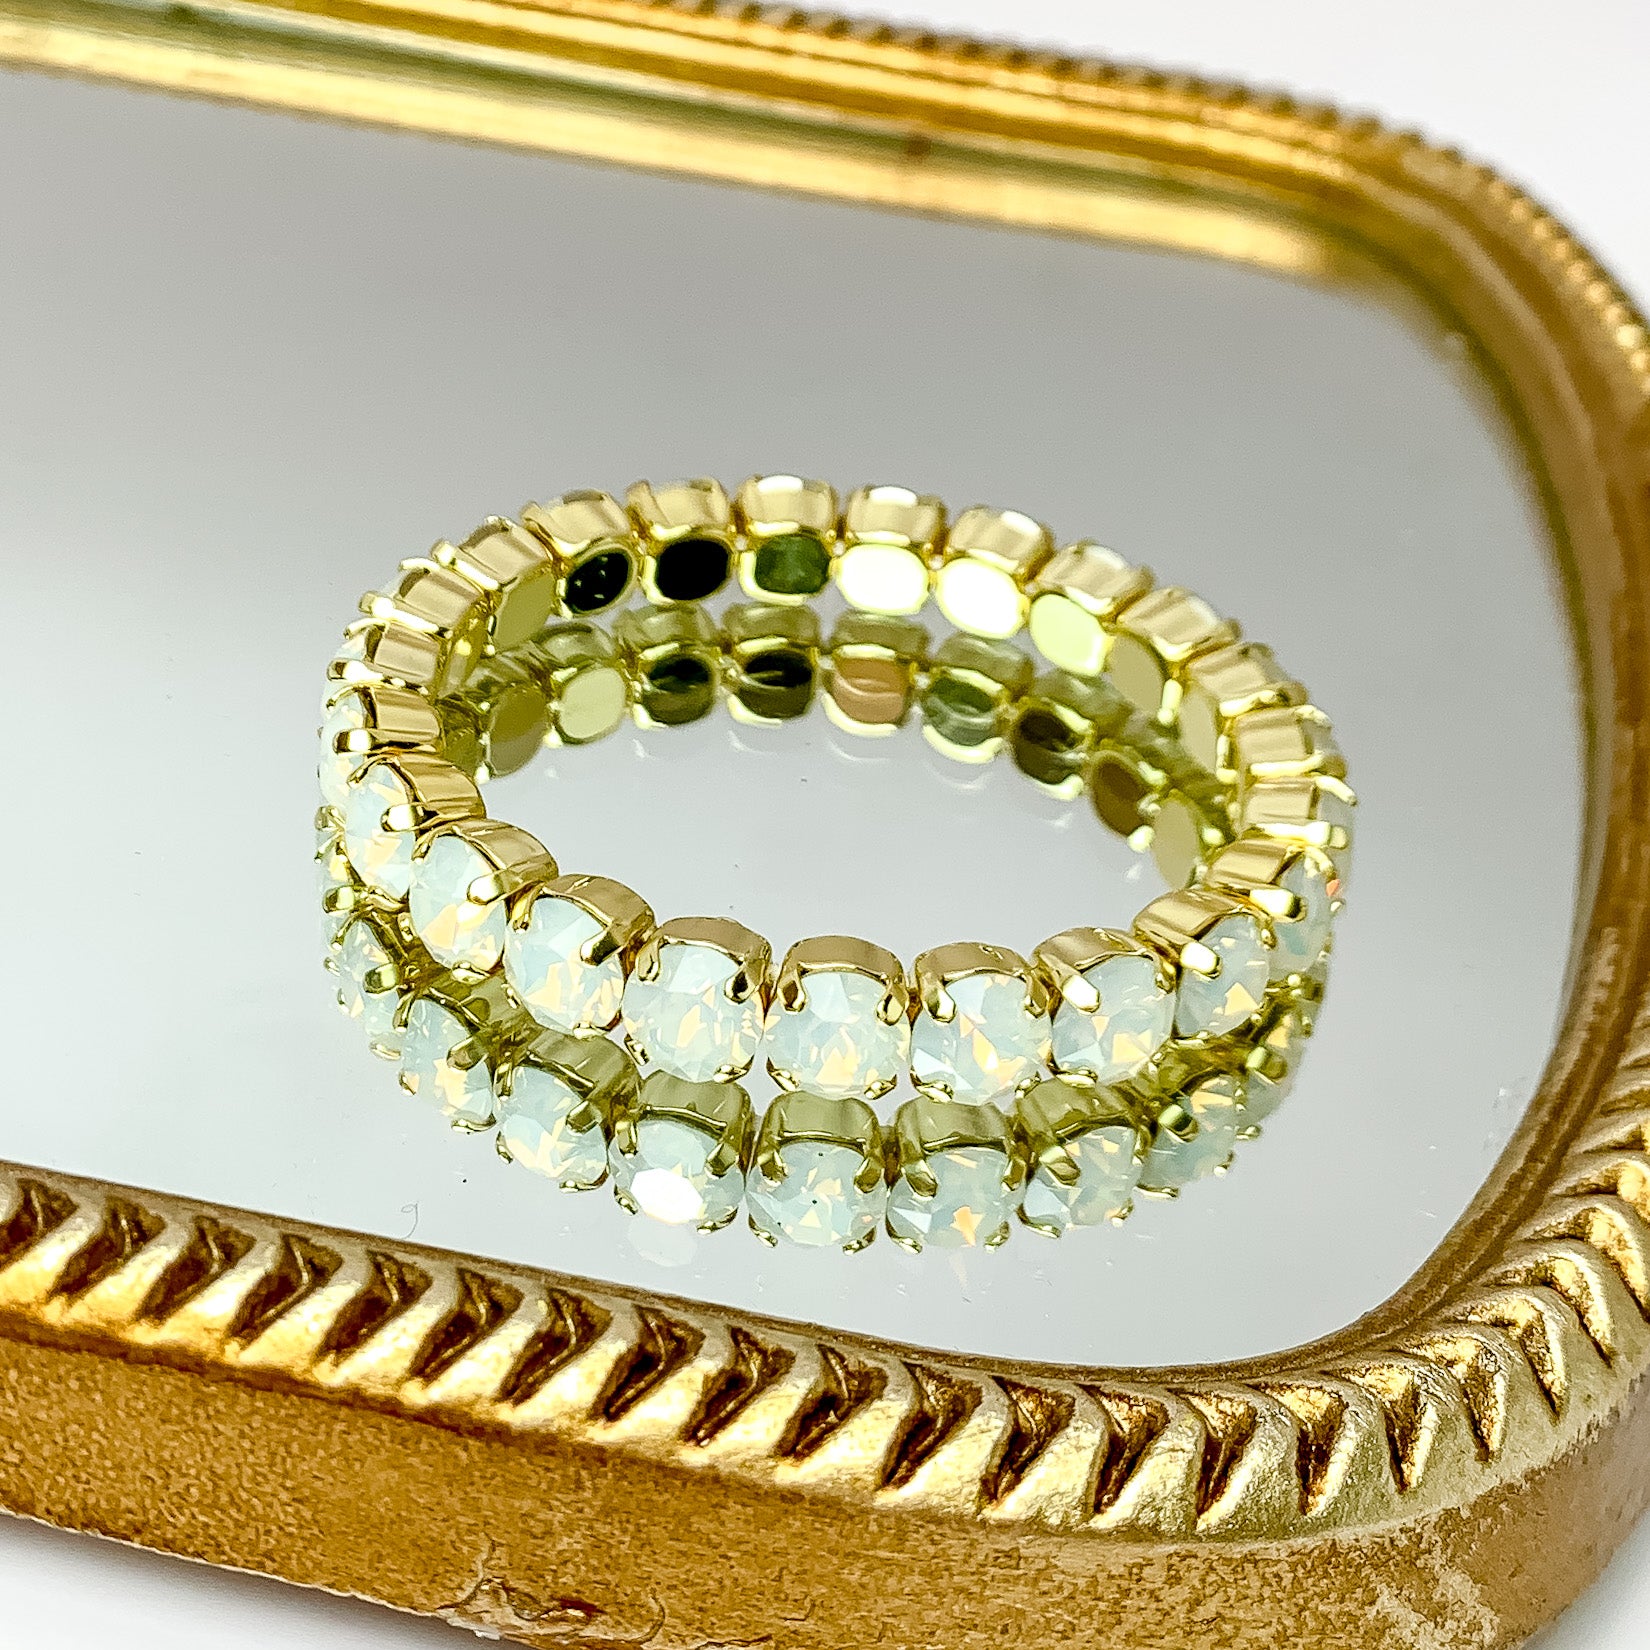 Stretchy white opal crystal bracelet with gold undertones. Pictured on a mirror with a gold frame.